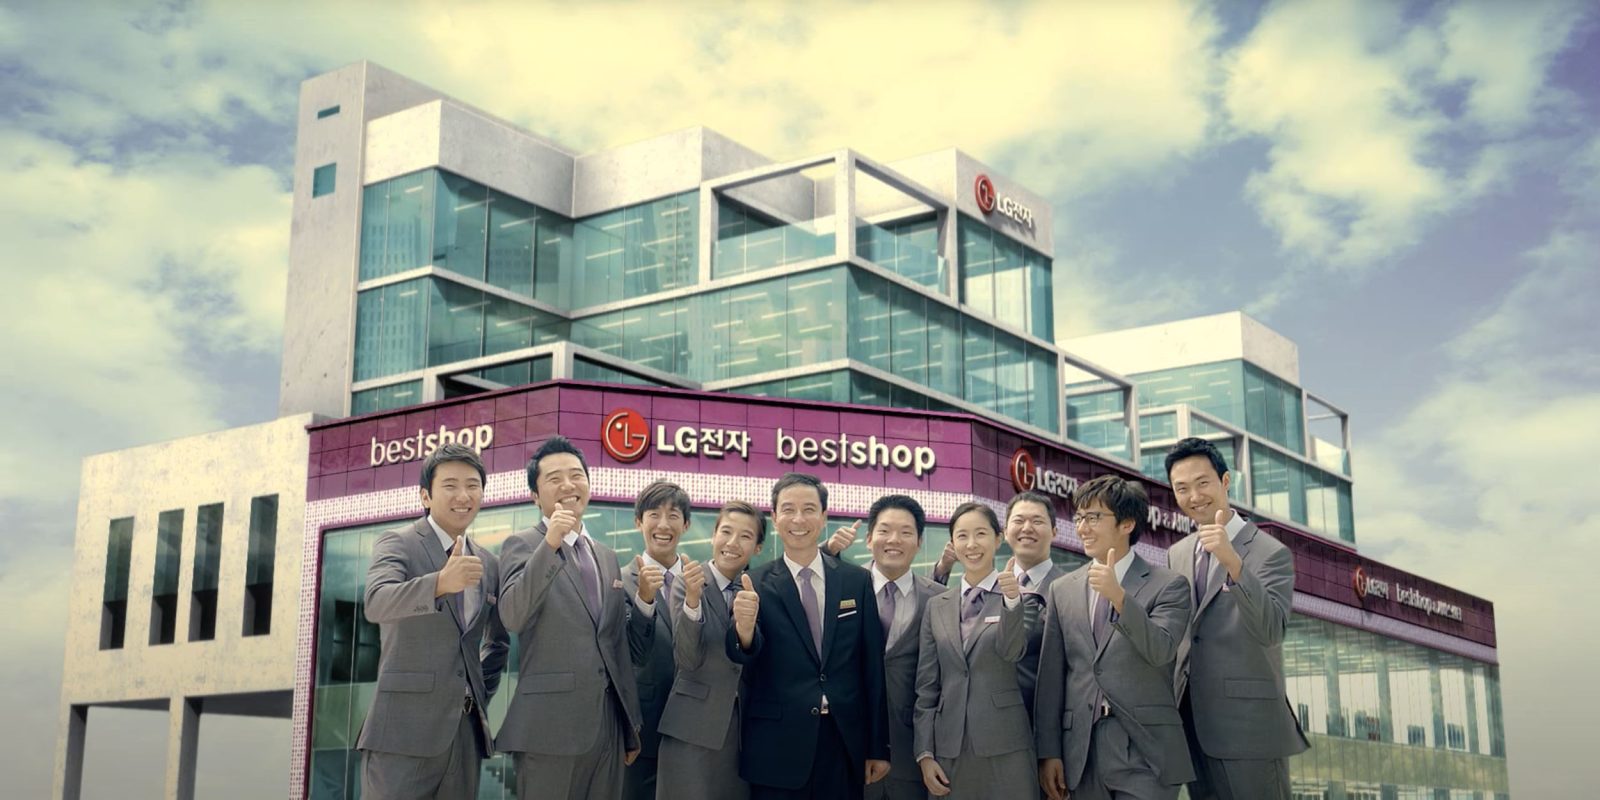 LG Best Shops in Korea may sell iPhones